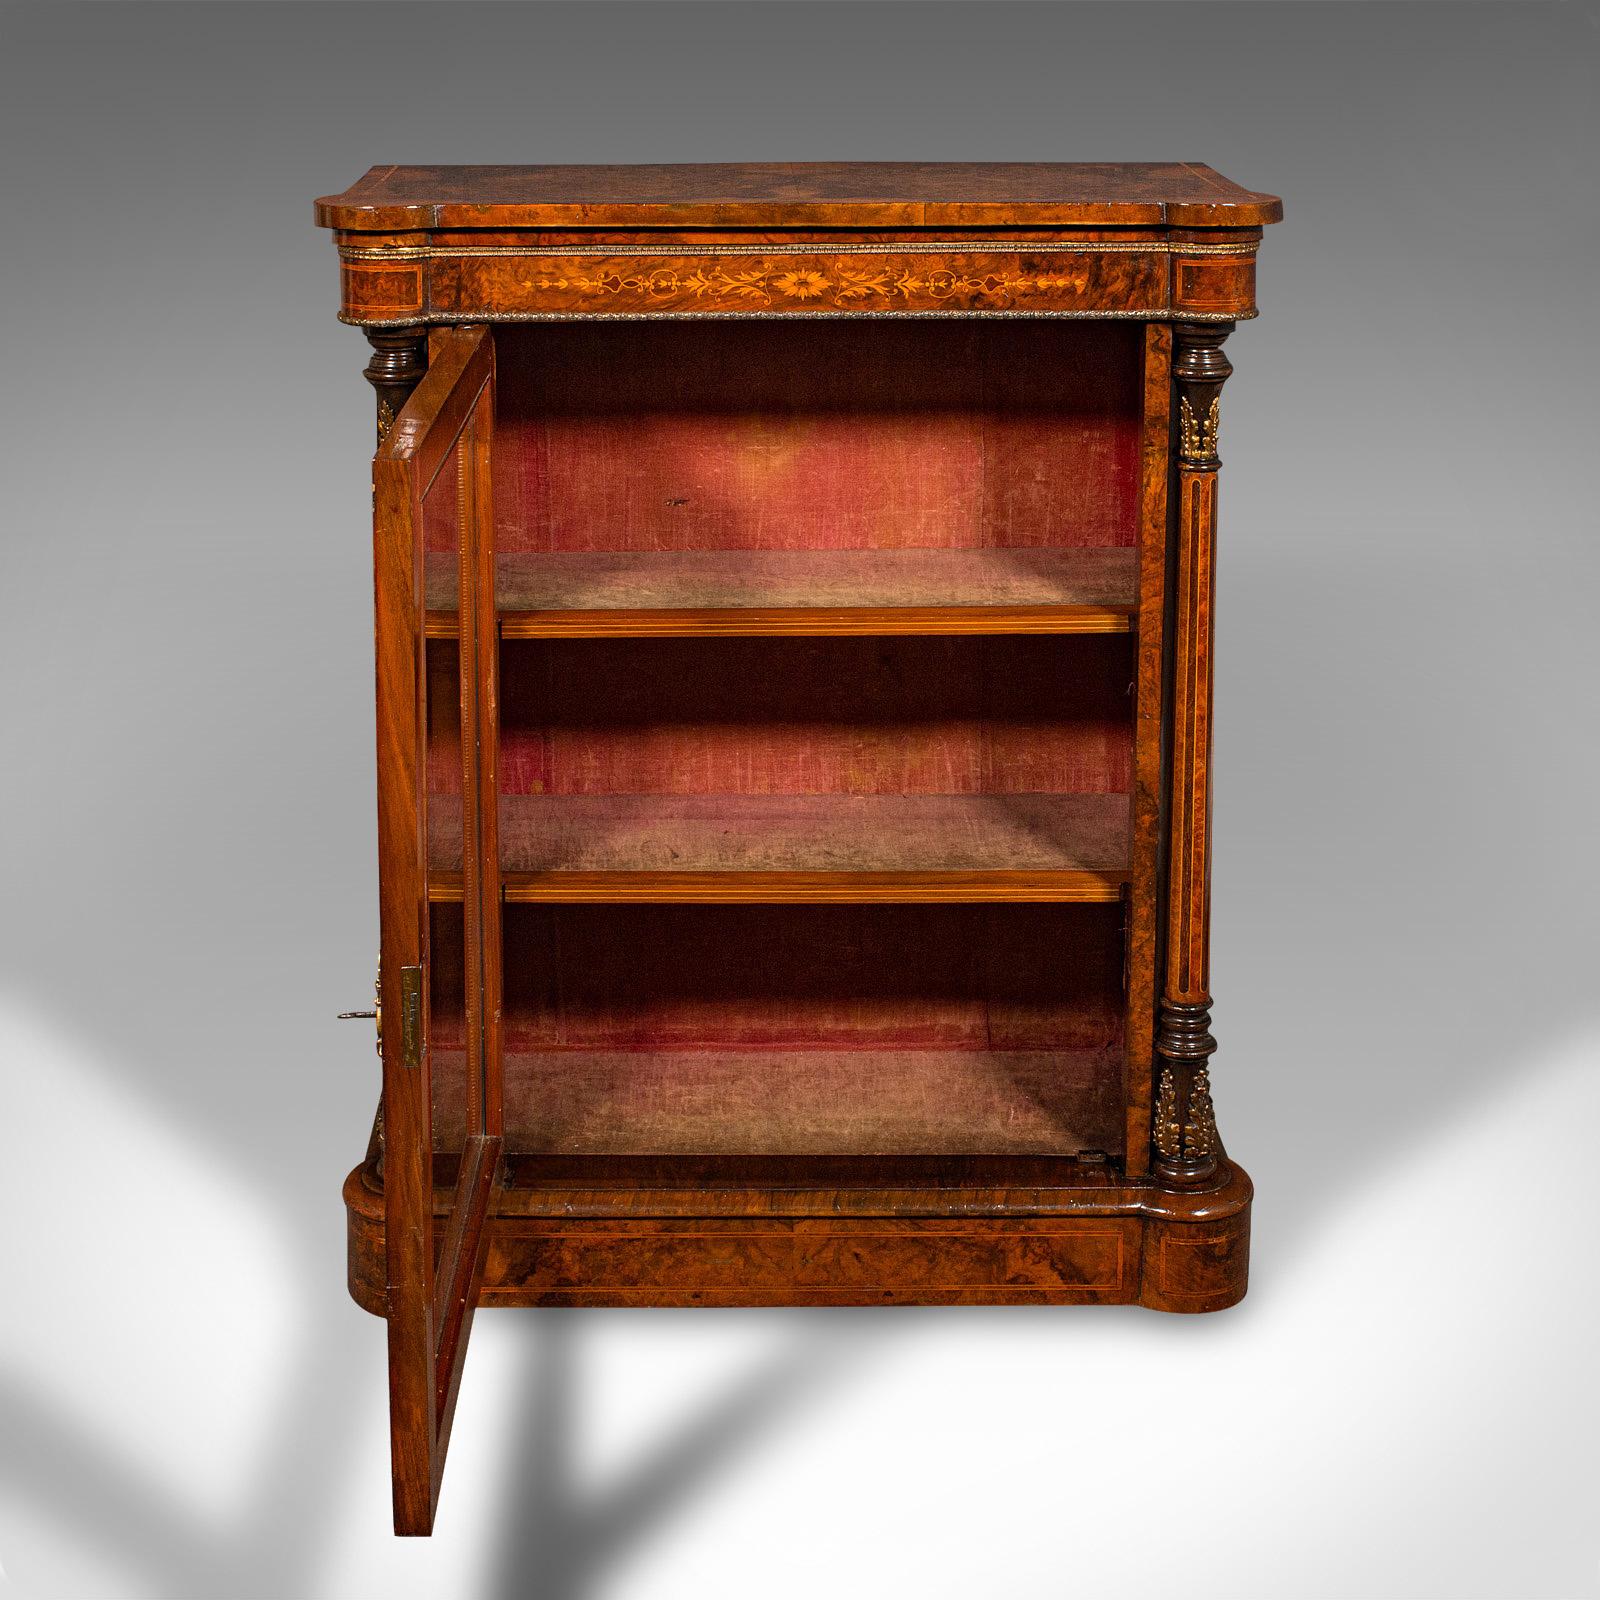 This is an antique pier display cabinet. An English, burr walnut and boxwood inlaid glazed bookcase or china cupboard, dating to the Regency period, circa 1820.

Majestic craftsmanship with exquisite colour and figuring
Displays a desirable aged